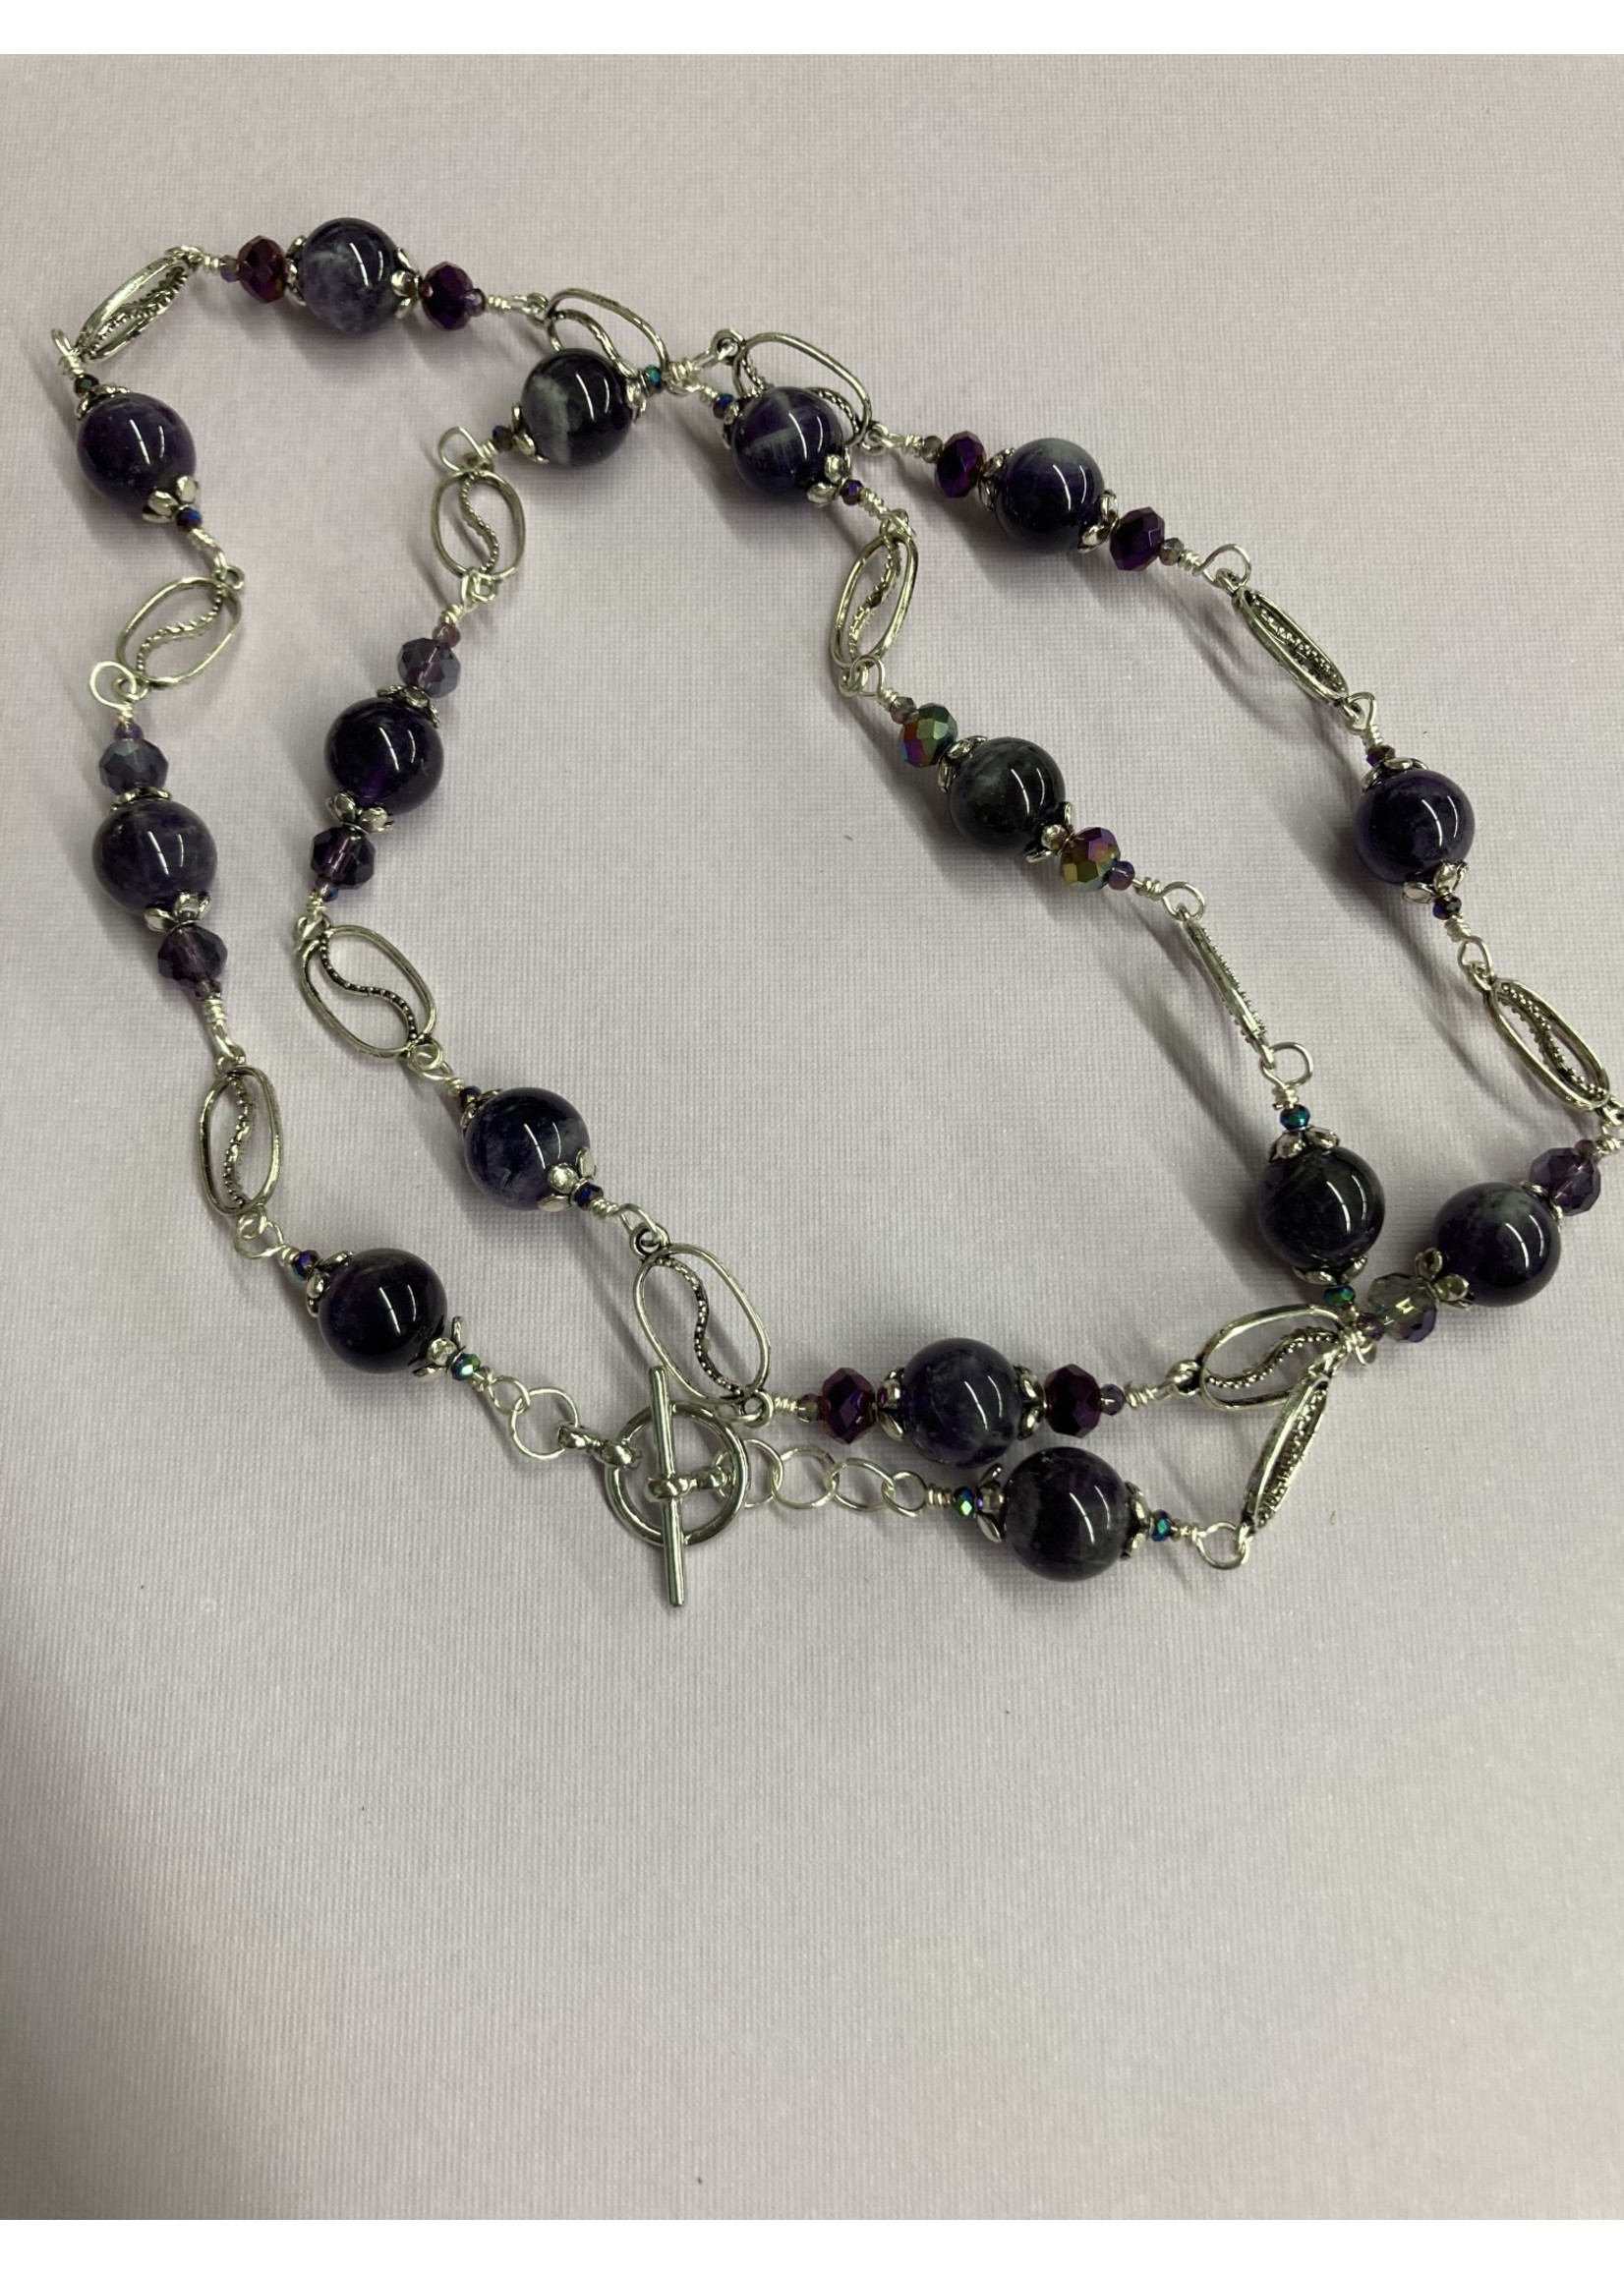 Our Twisted Dahlia N212 Amethyst Beads with Purple Crystals and Silver Accent Necklace